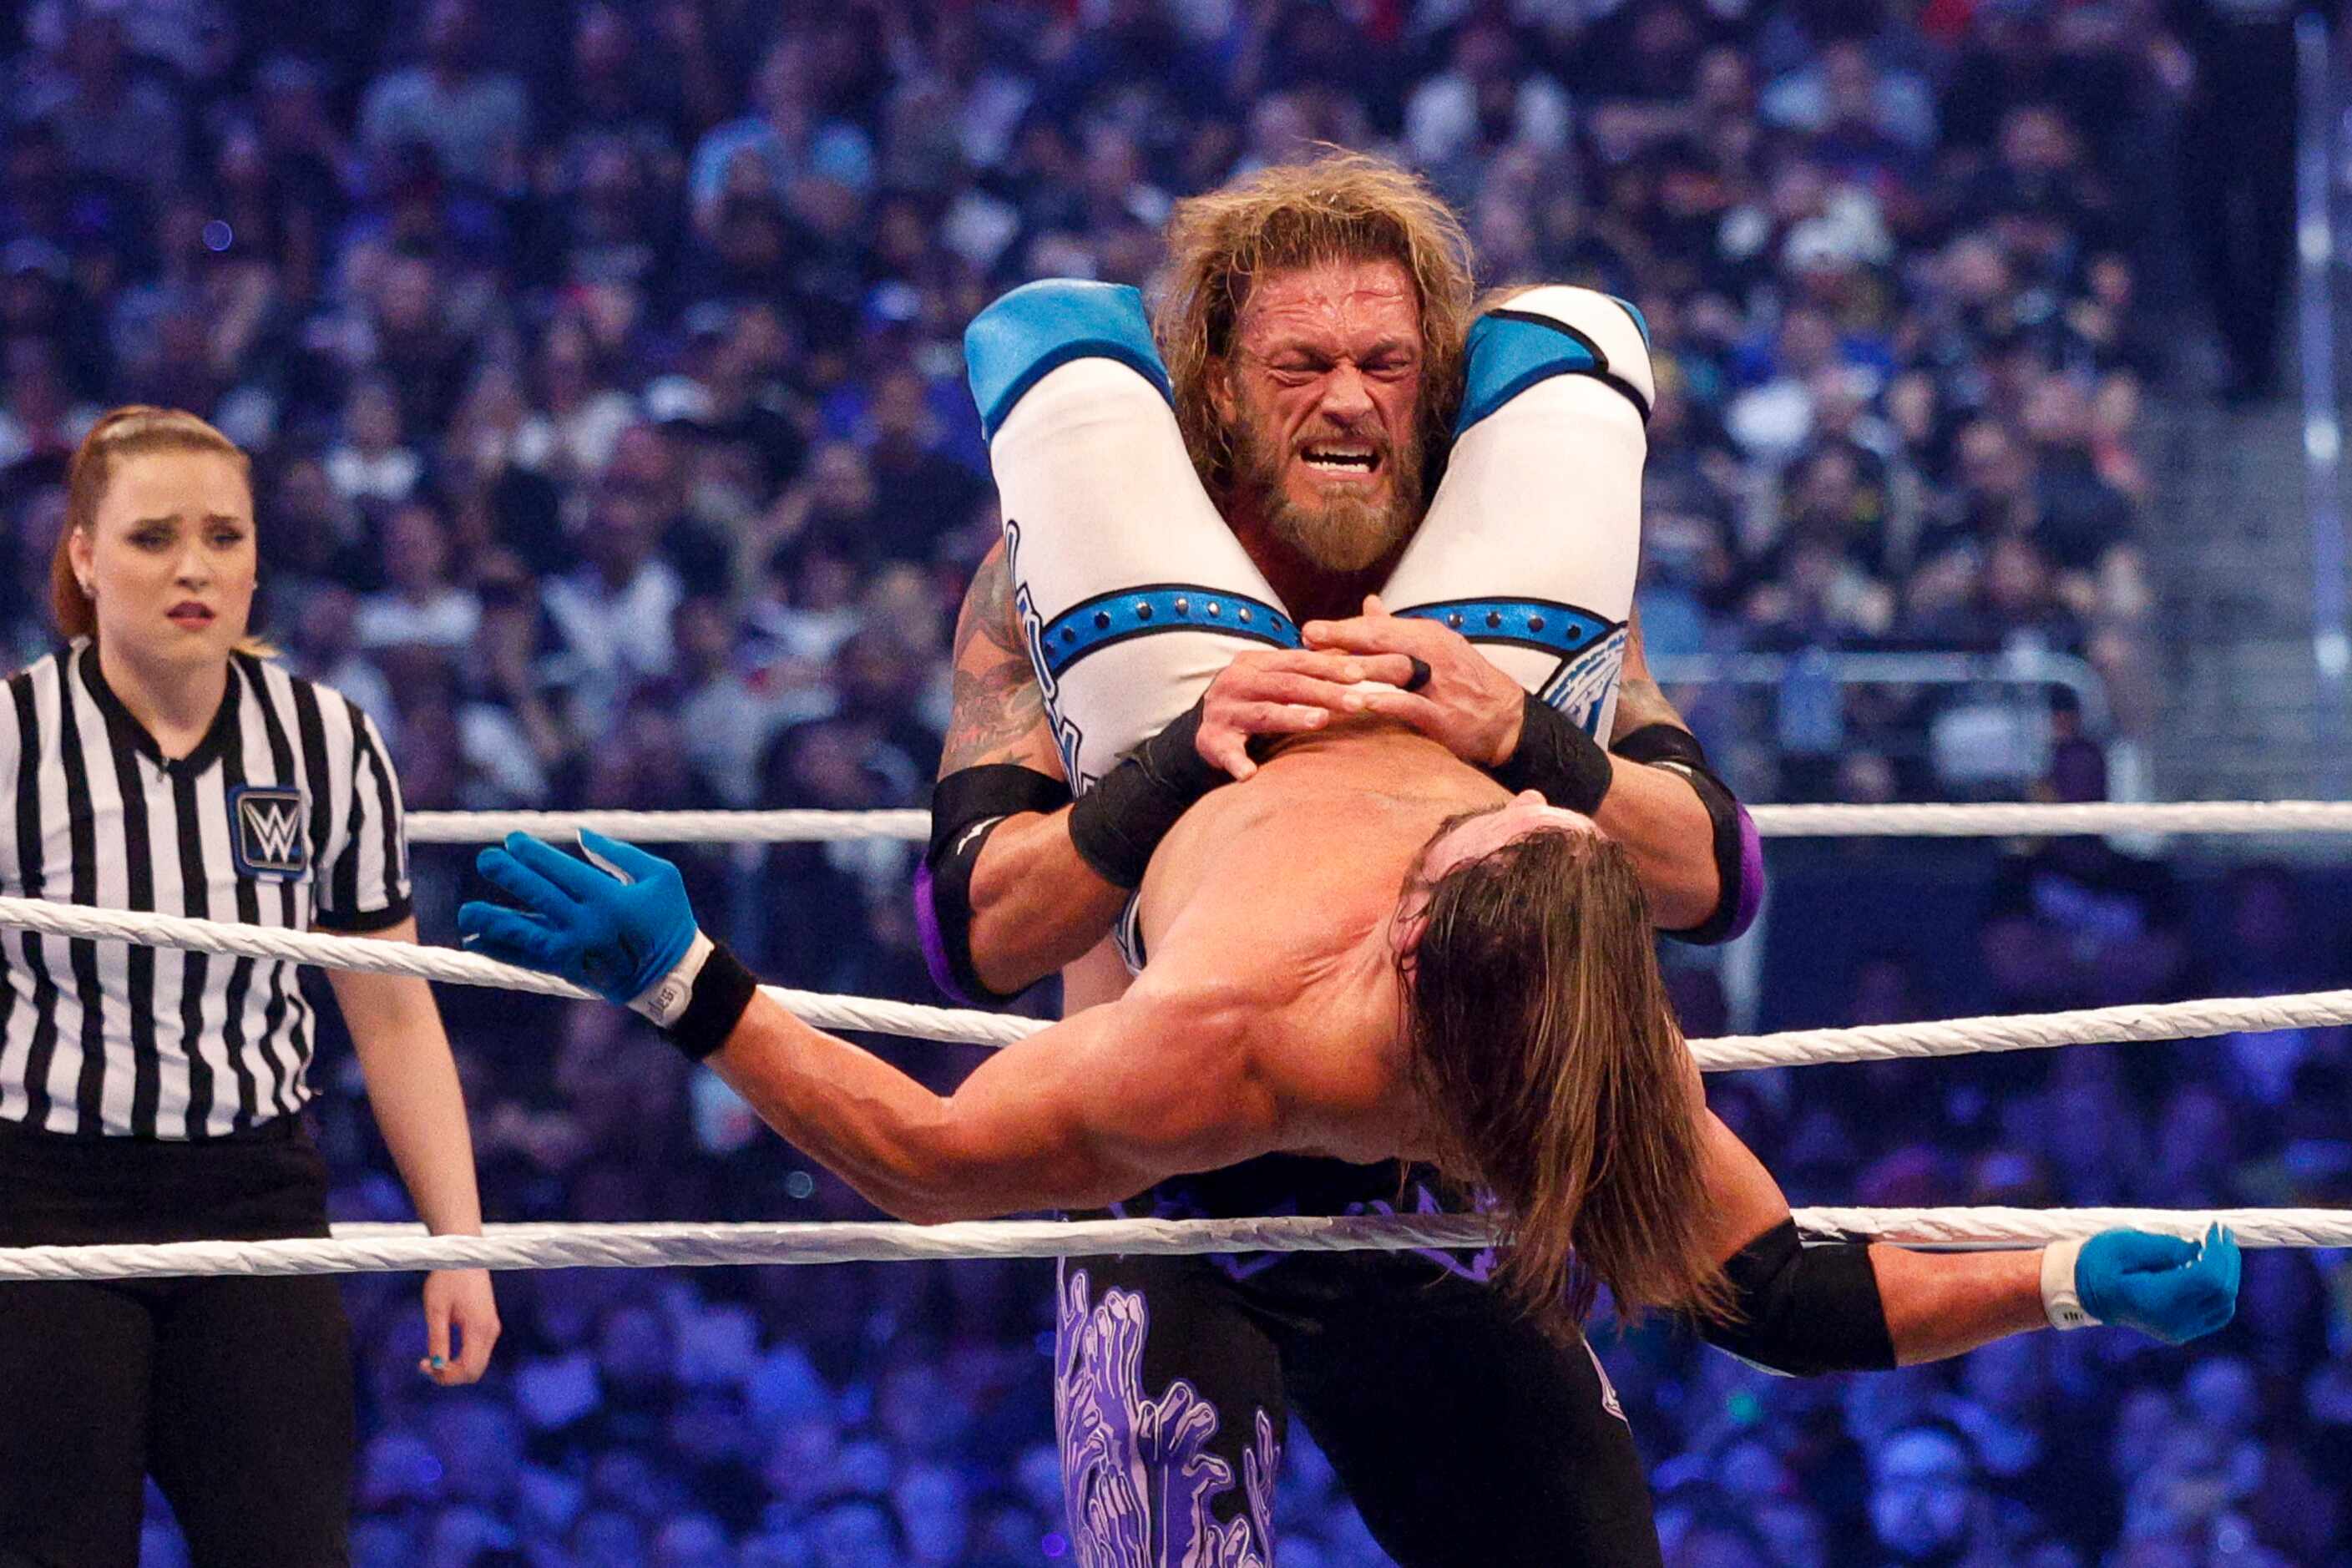 Edge slams AJ Styles into the ropes during a match at WrestleMania Sunday at AT&T Stadium in...